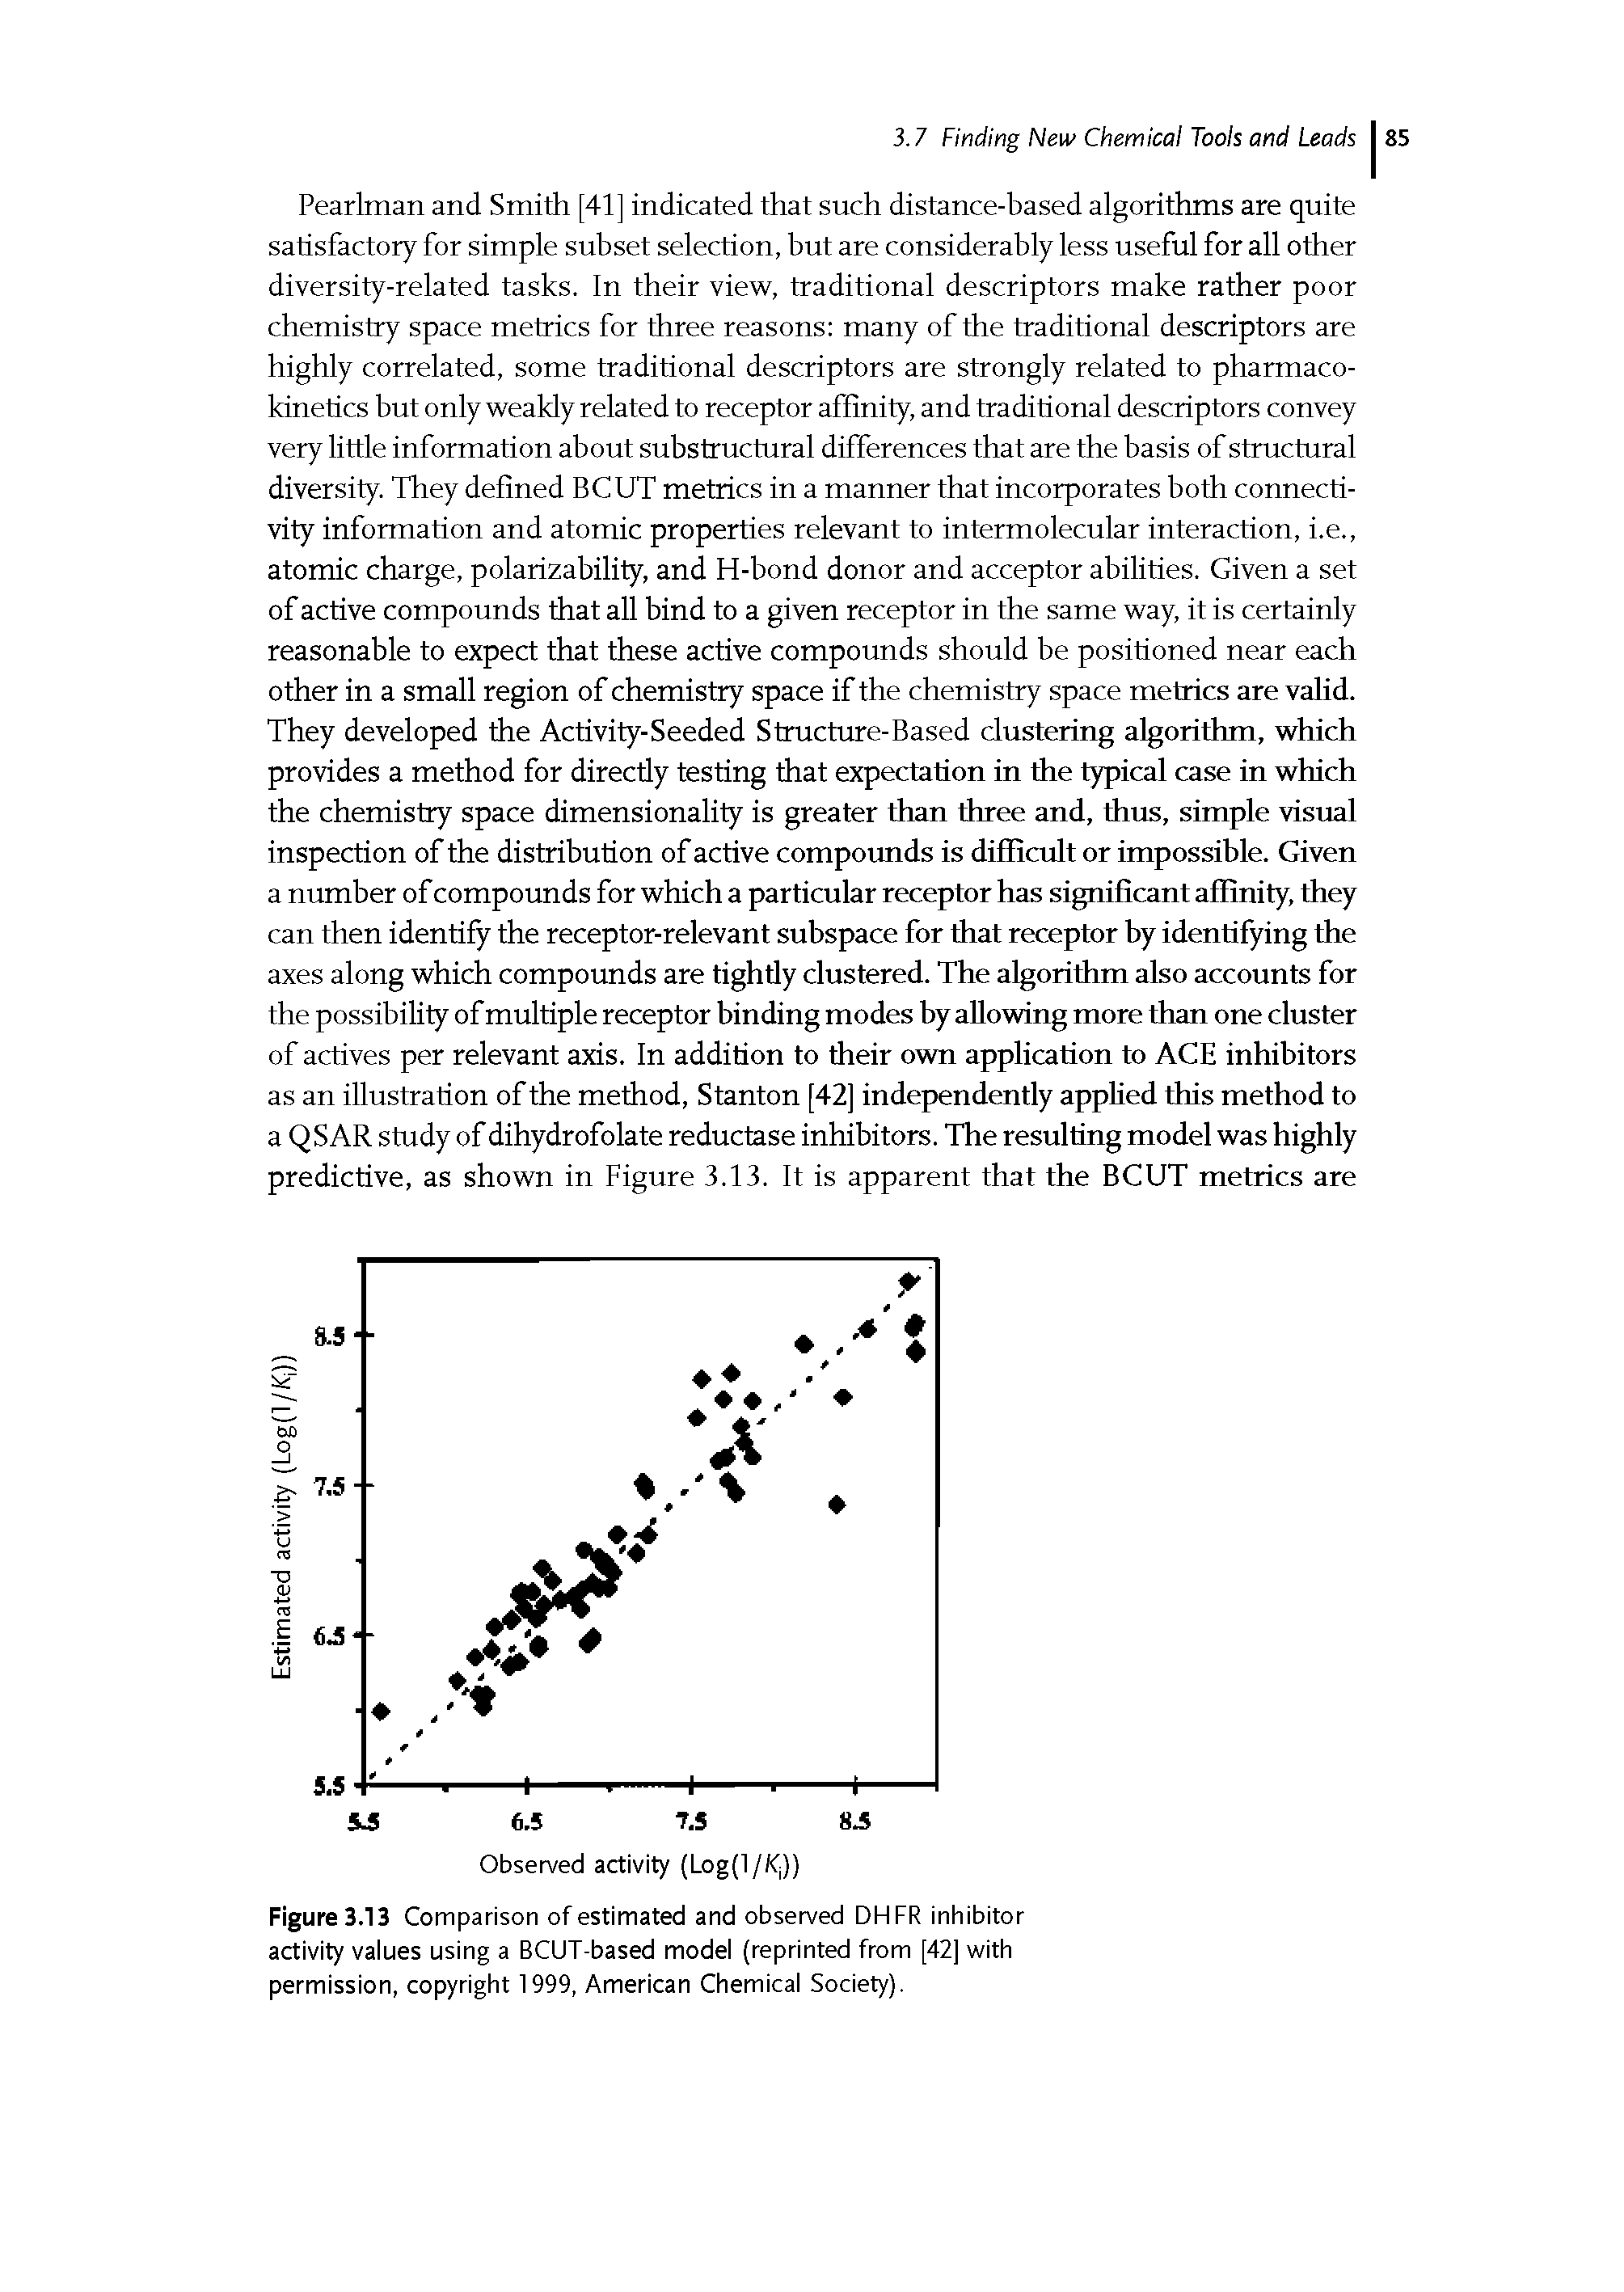 Figure 3.13 Comparison of estimated and observed DHFR inhibitor activity values using a BCUT-based model (reprinted from [42] with permission, copyright 1999, American Chemical Society).